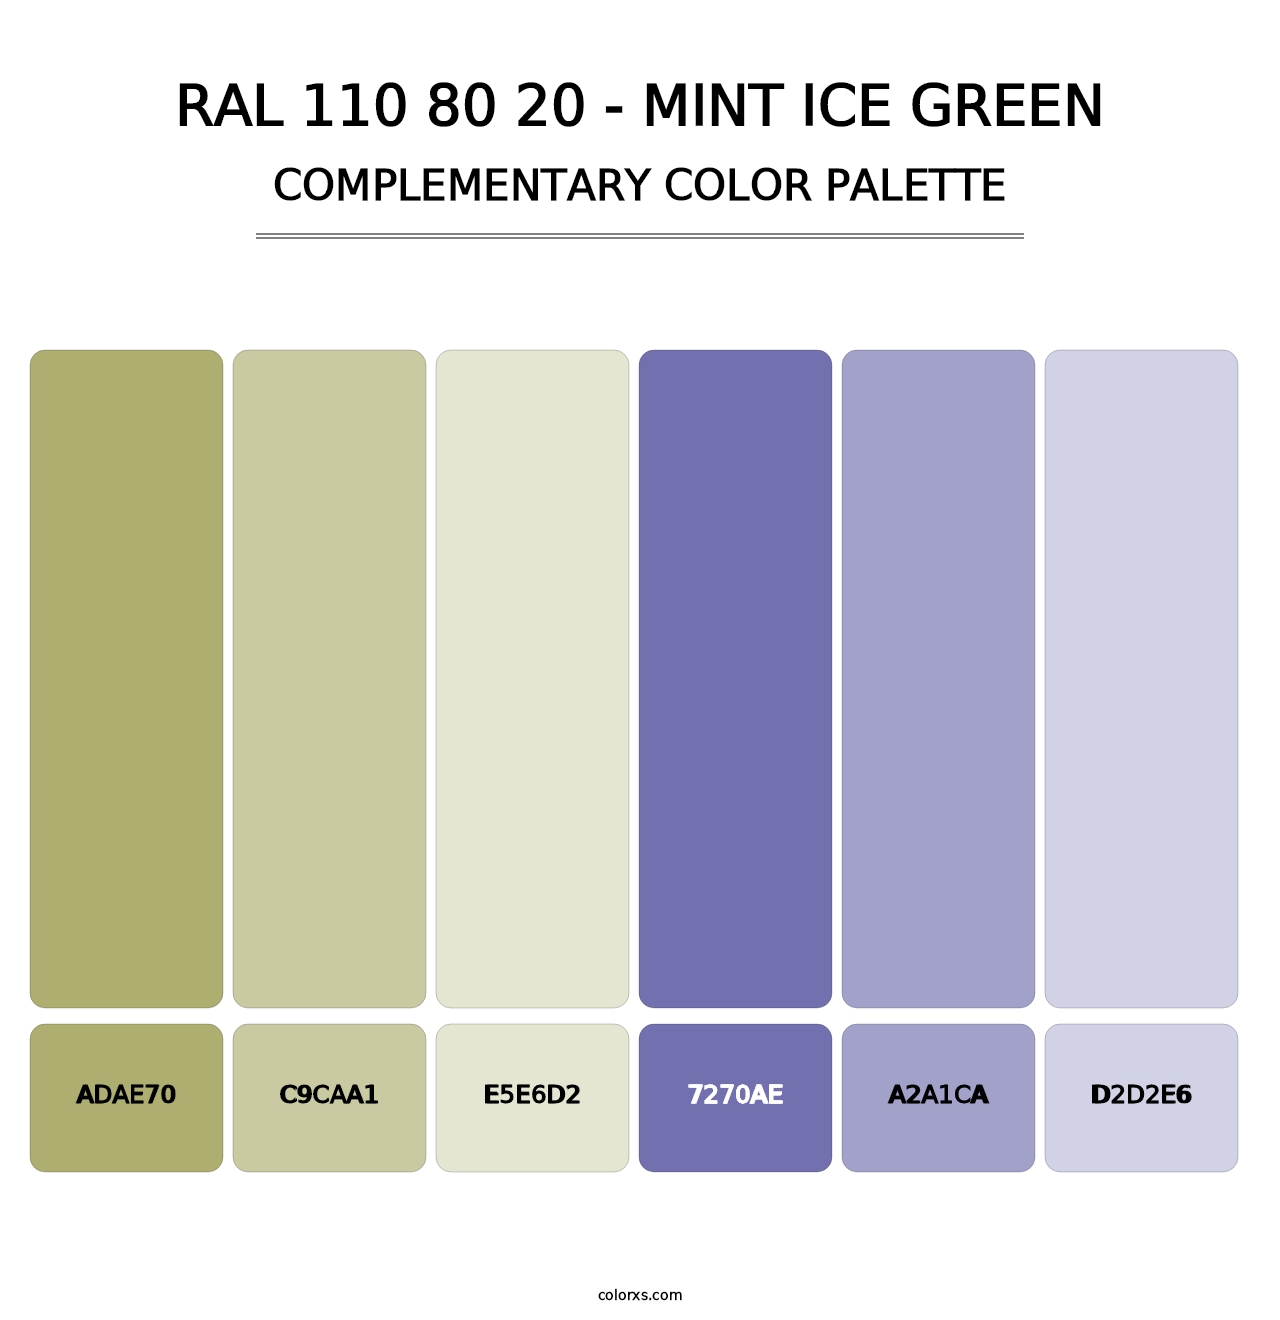 RAL 110 80 20 - Mint Ice Green - Complementary Color Palette